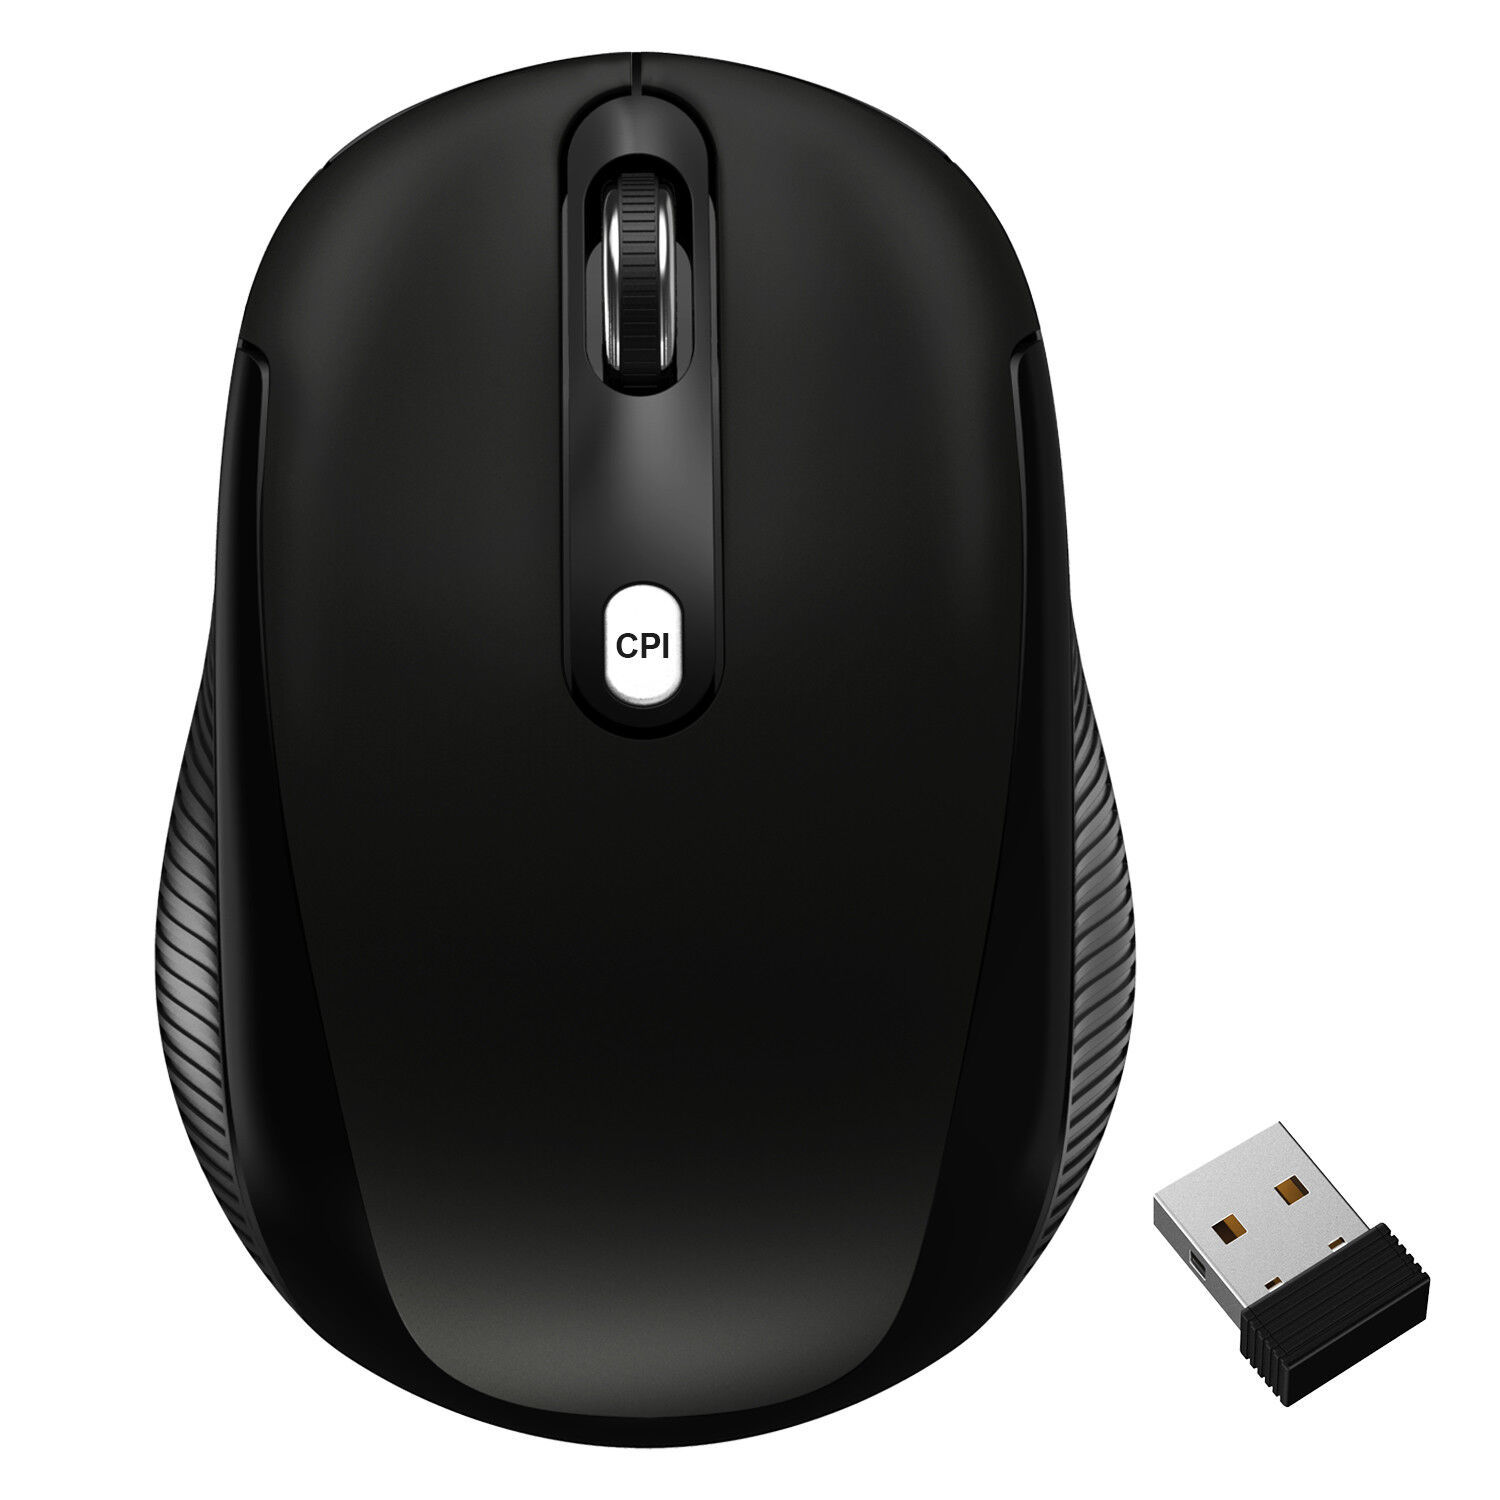 JETech 2.4Ghz Wireless Mobile Optical Mouse with 2 CPI Levels and USB Receiver - $29.99